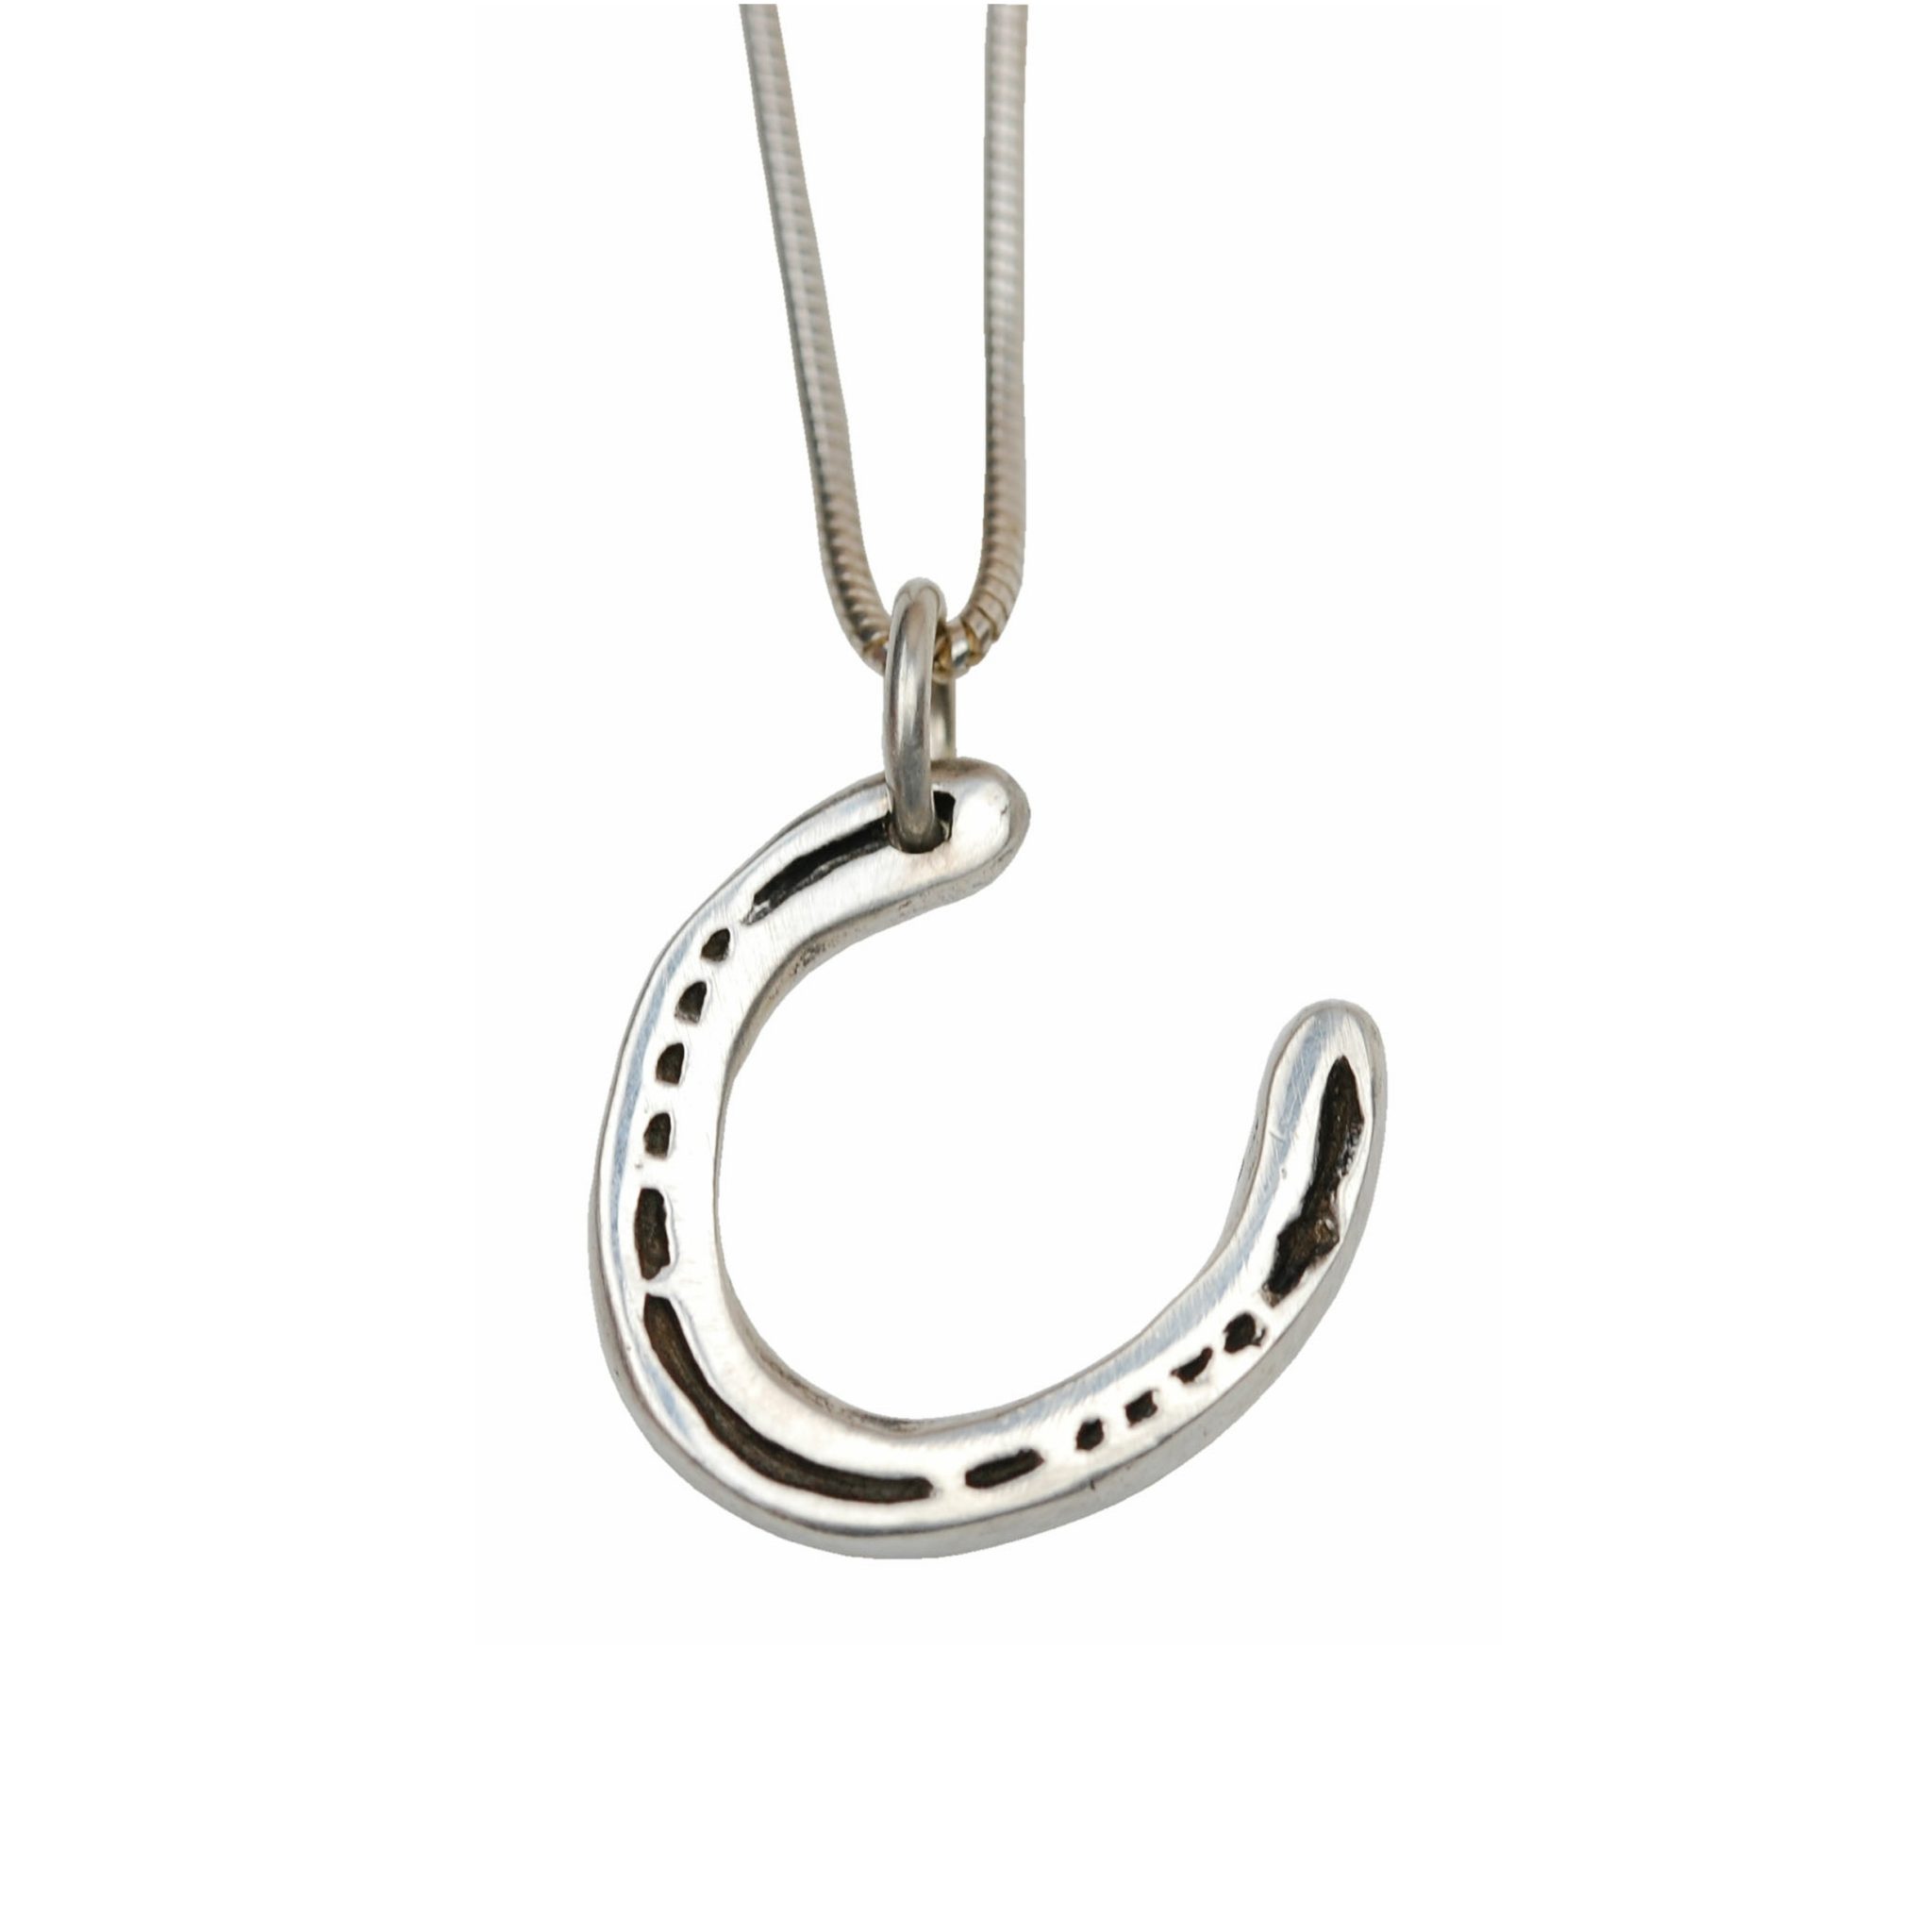 Sterling silver horse shoe charm